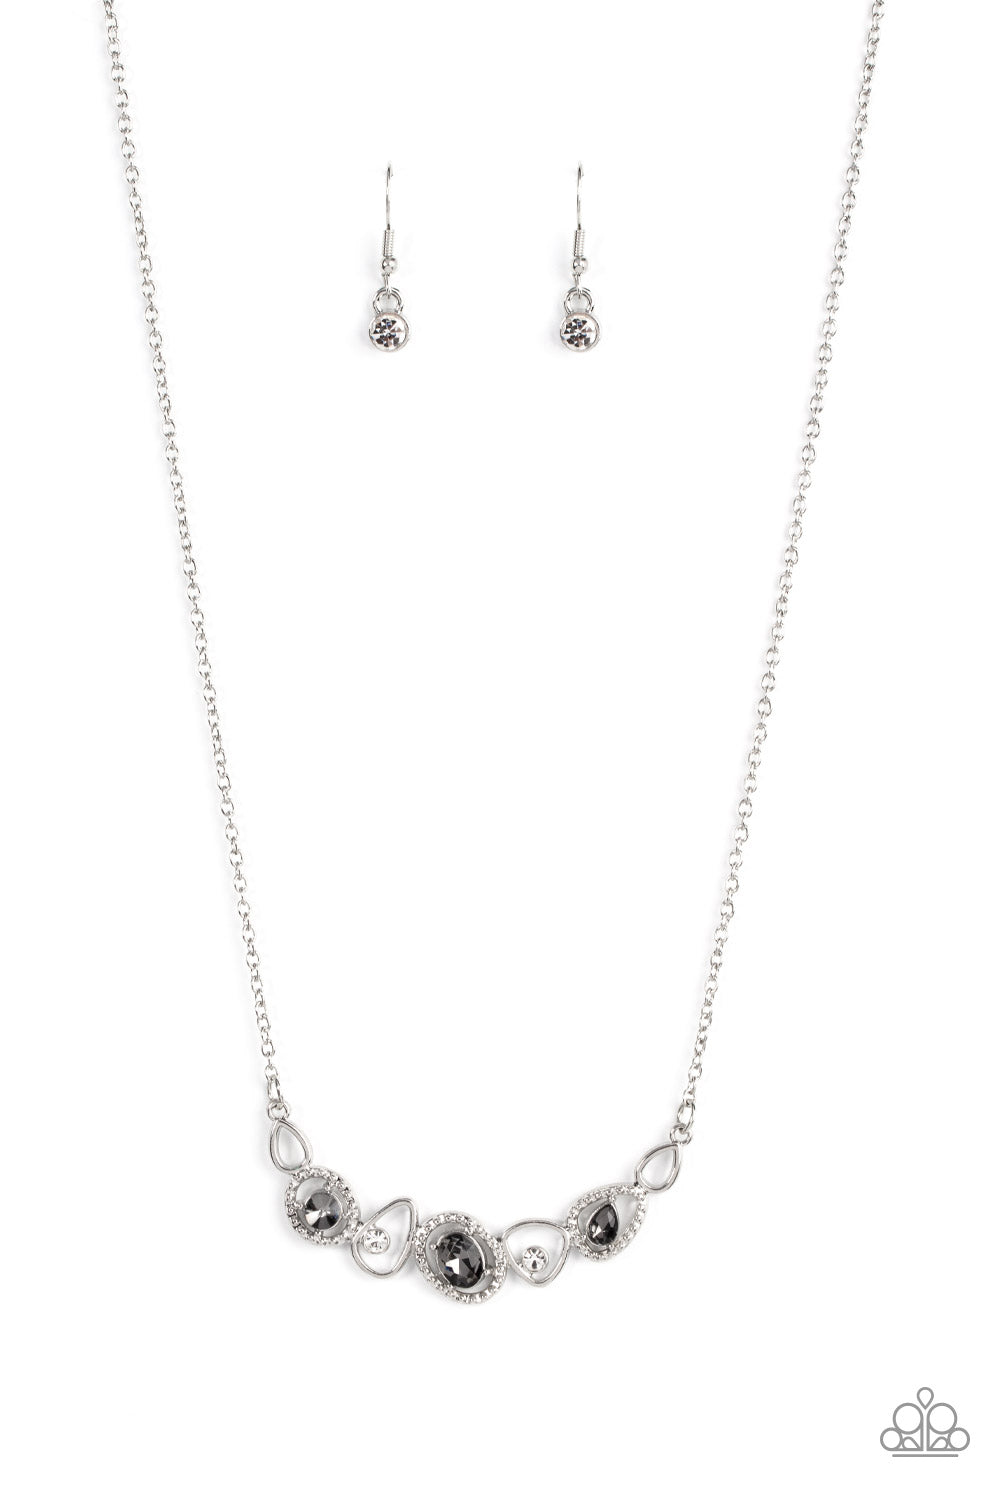 five-dollar-jewelry-celestial-cadence-silver-necklace-paparazzi-accessories